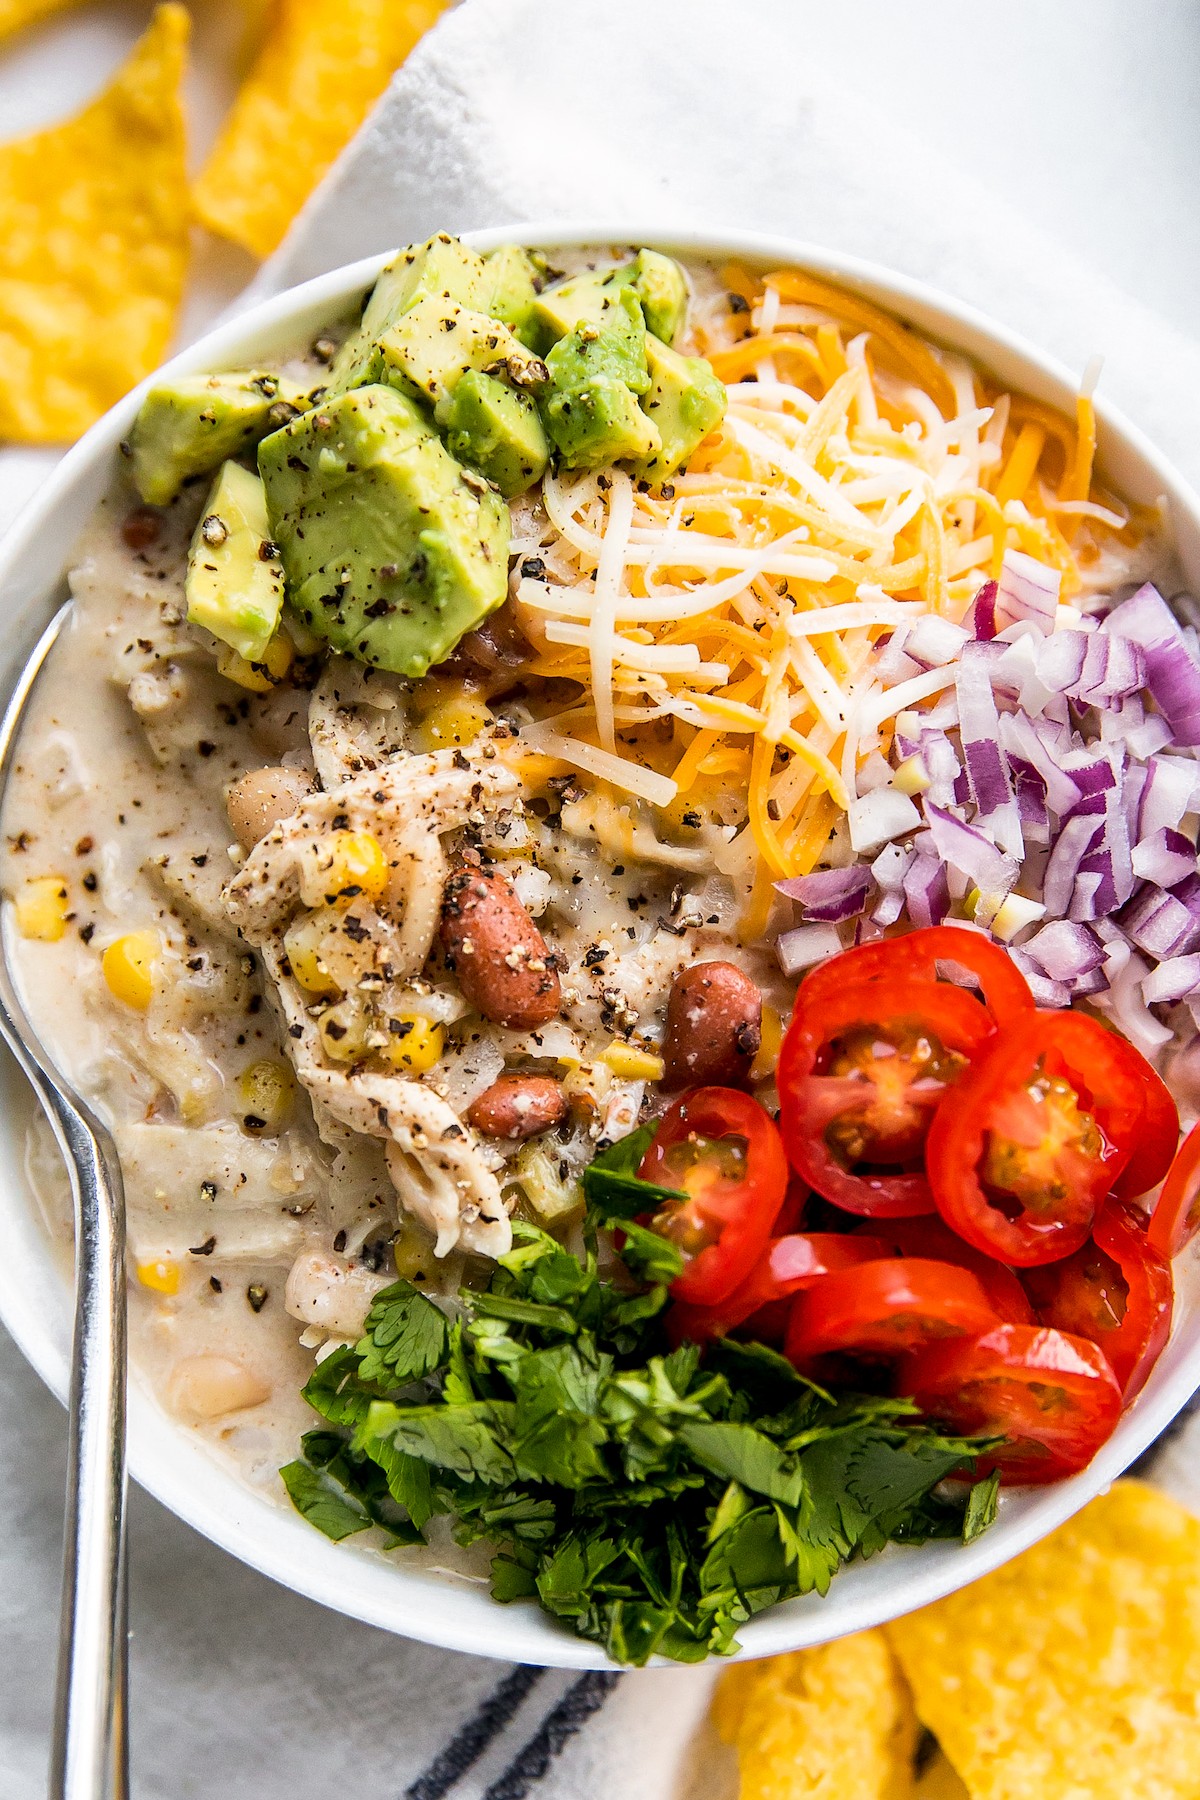 A large bowl of white chili, topped with avocado, tomato, red onion, and more.